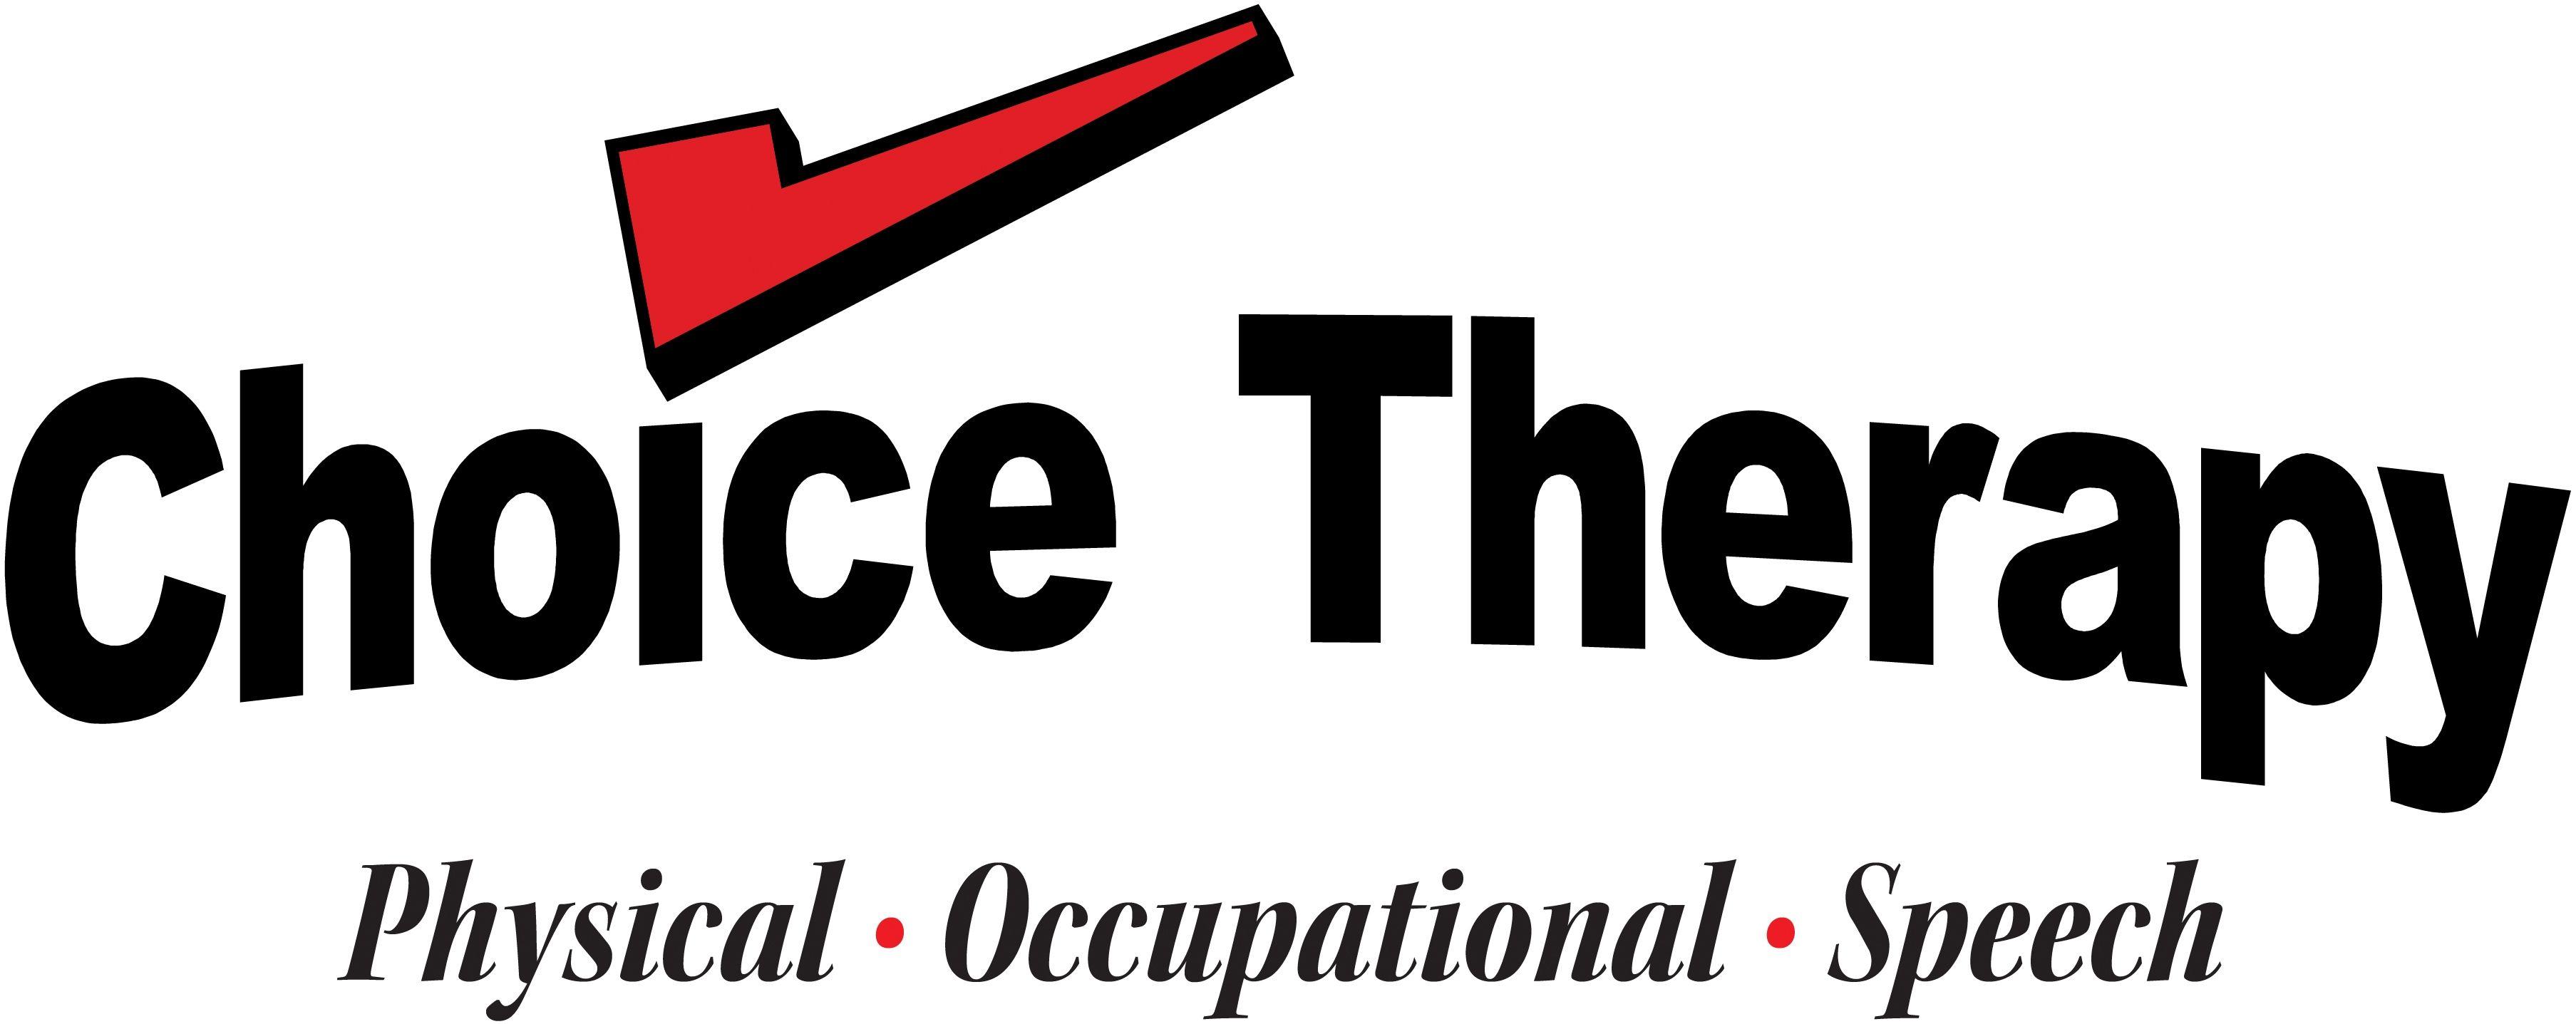 Therap Logo - Choice therapy logo NEW-jpeg - Choice Therapy